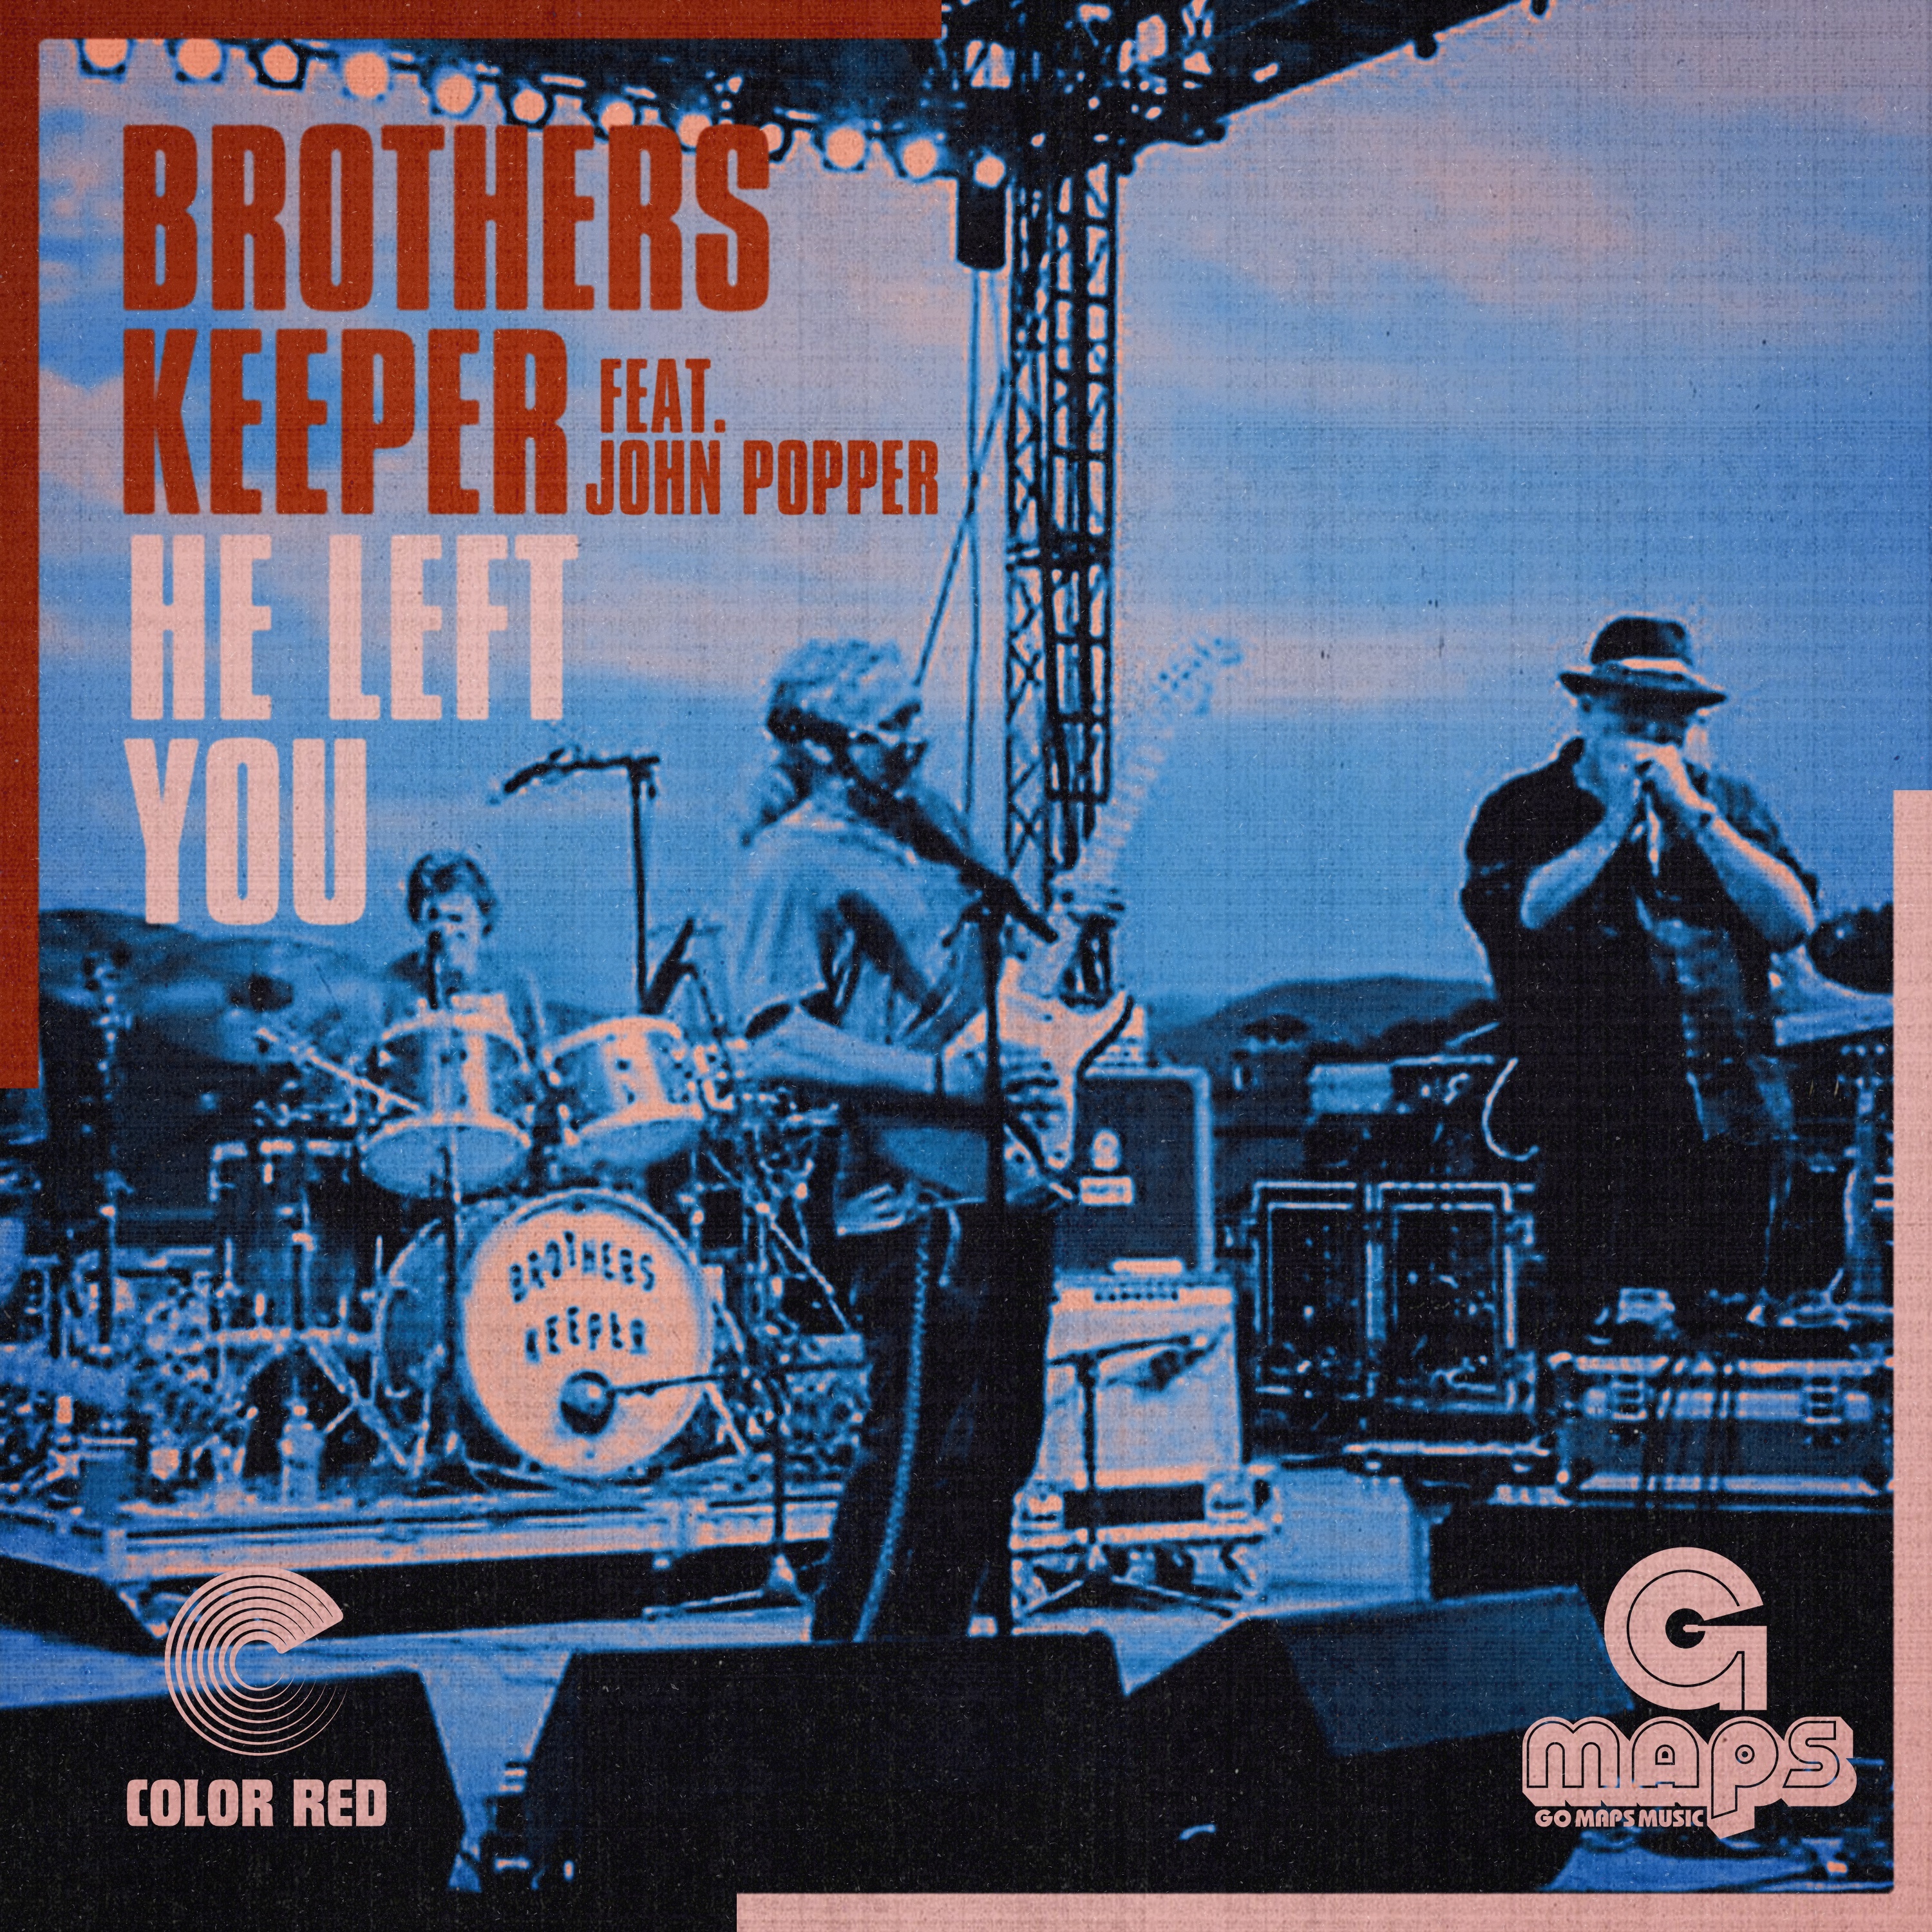 BROTHERS KEEPER ENLISTS JOHN POPPER OF BLUES TRAVELER ON "HE LEFT YOU" AHEAD OF MAPS IN MOTION FUNDRAISER